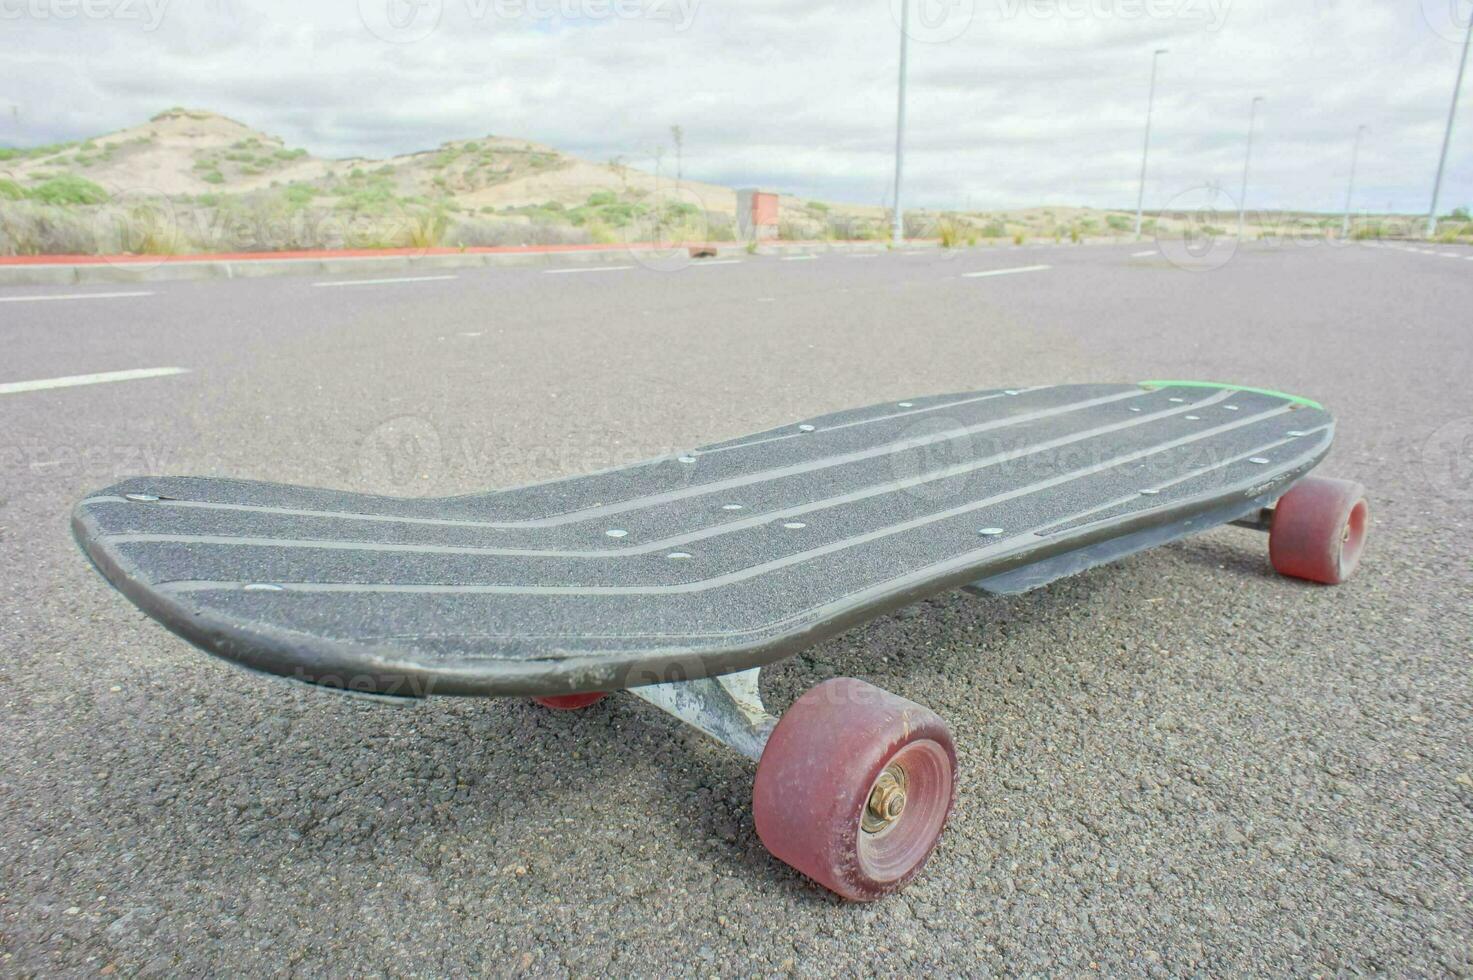 A skateboard on the road photo